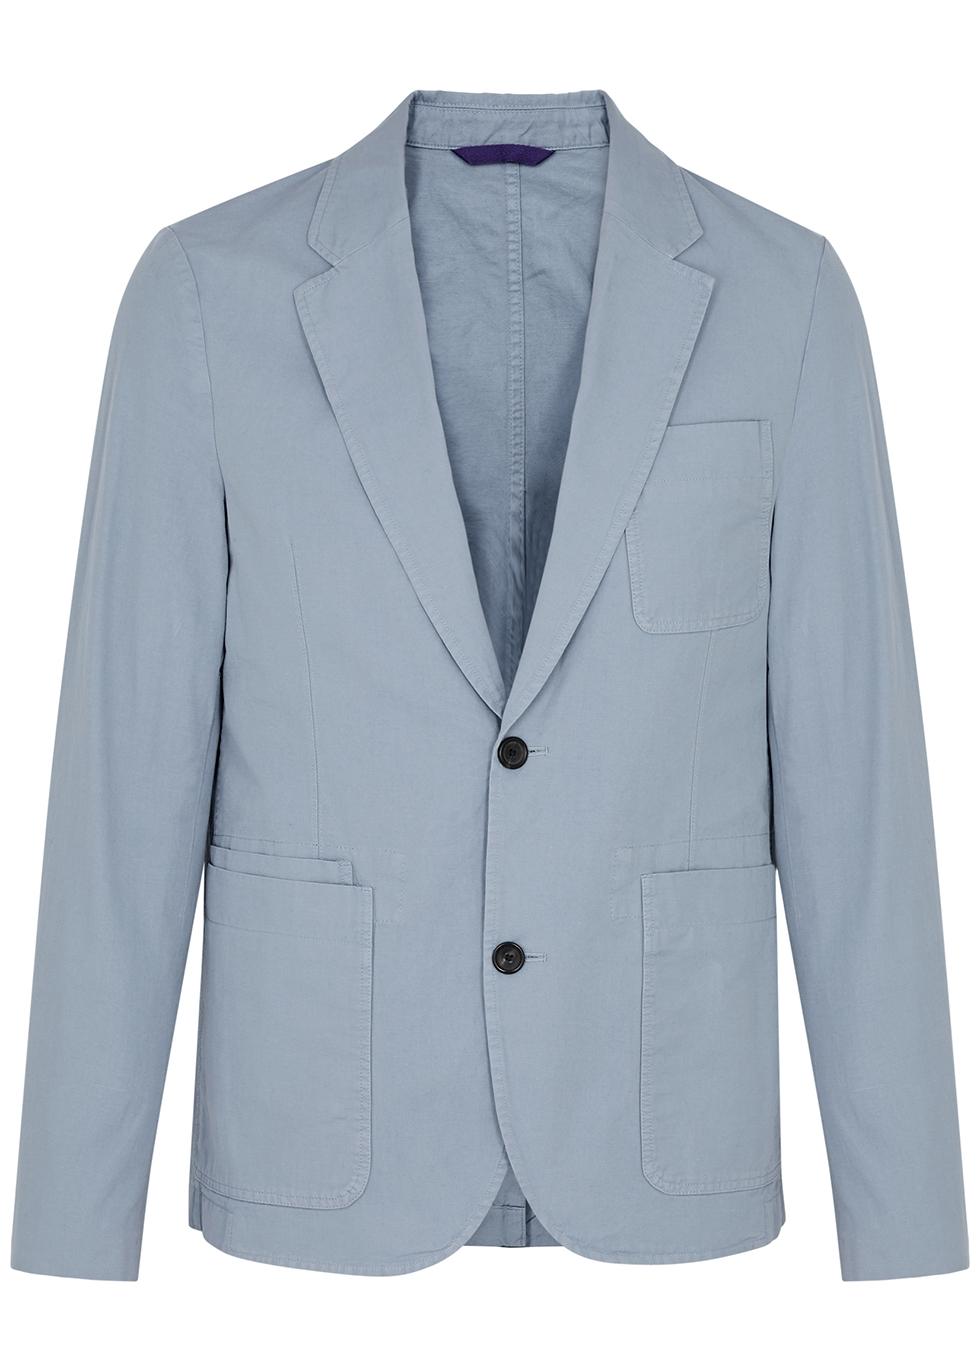 PS by Paul Smith Cotton-blend Blazer in Blue for Men | Lyst